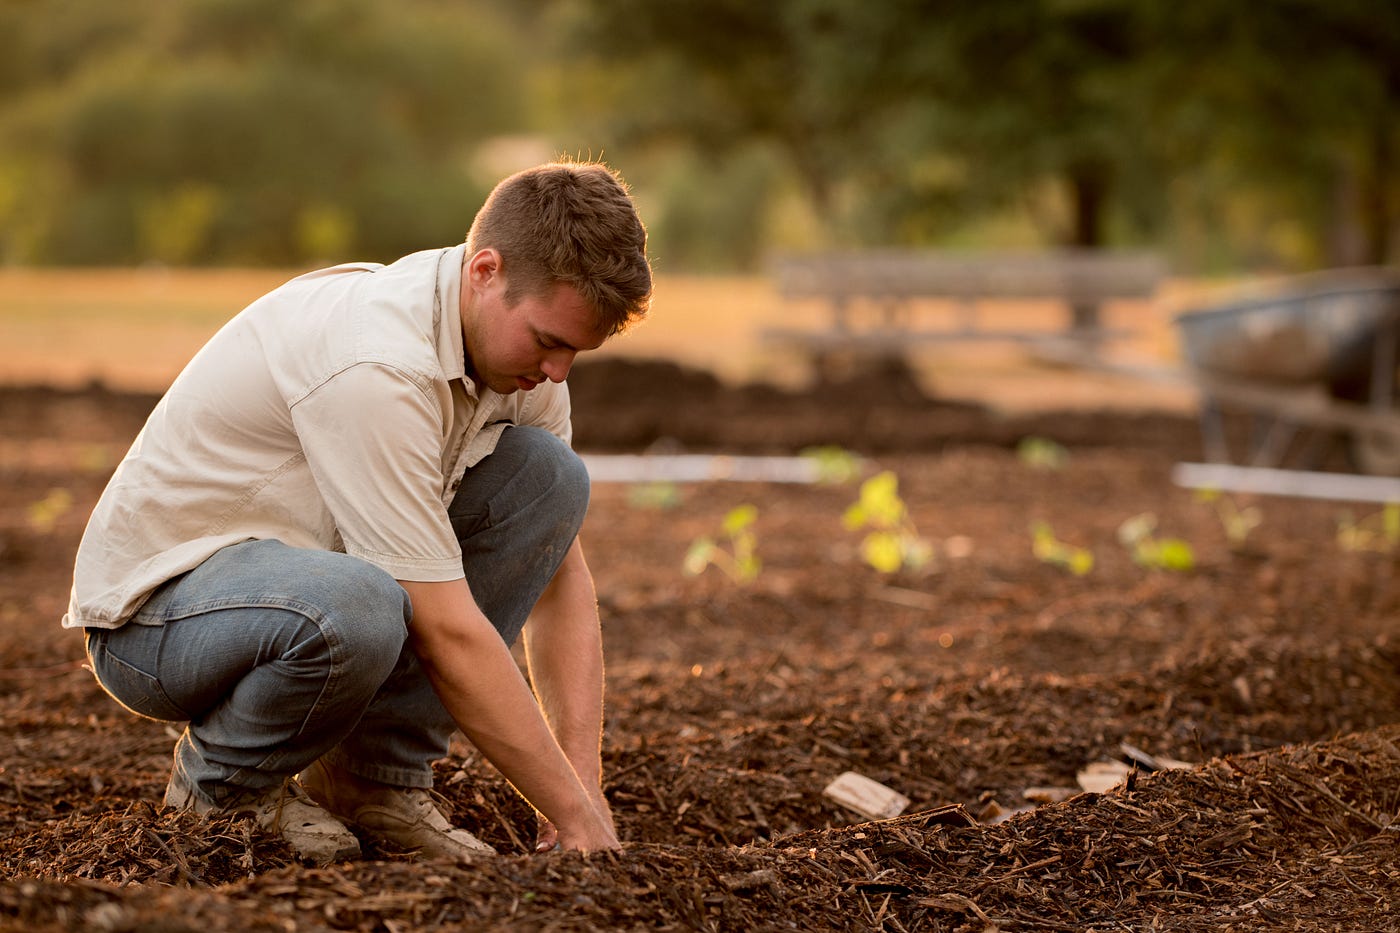 Man planting something in a field of long dug out lines. The man is squatting and wears blue jeans and a white short sleeve shirt.